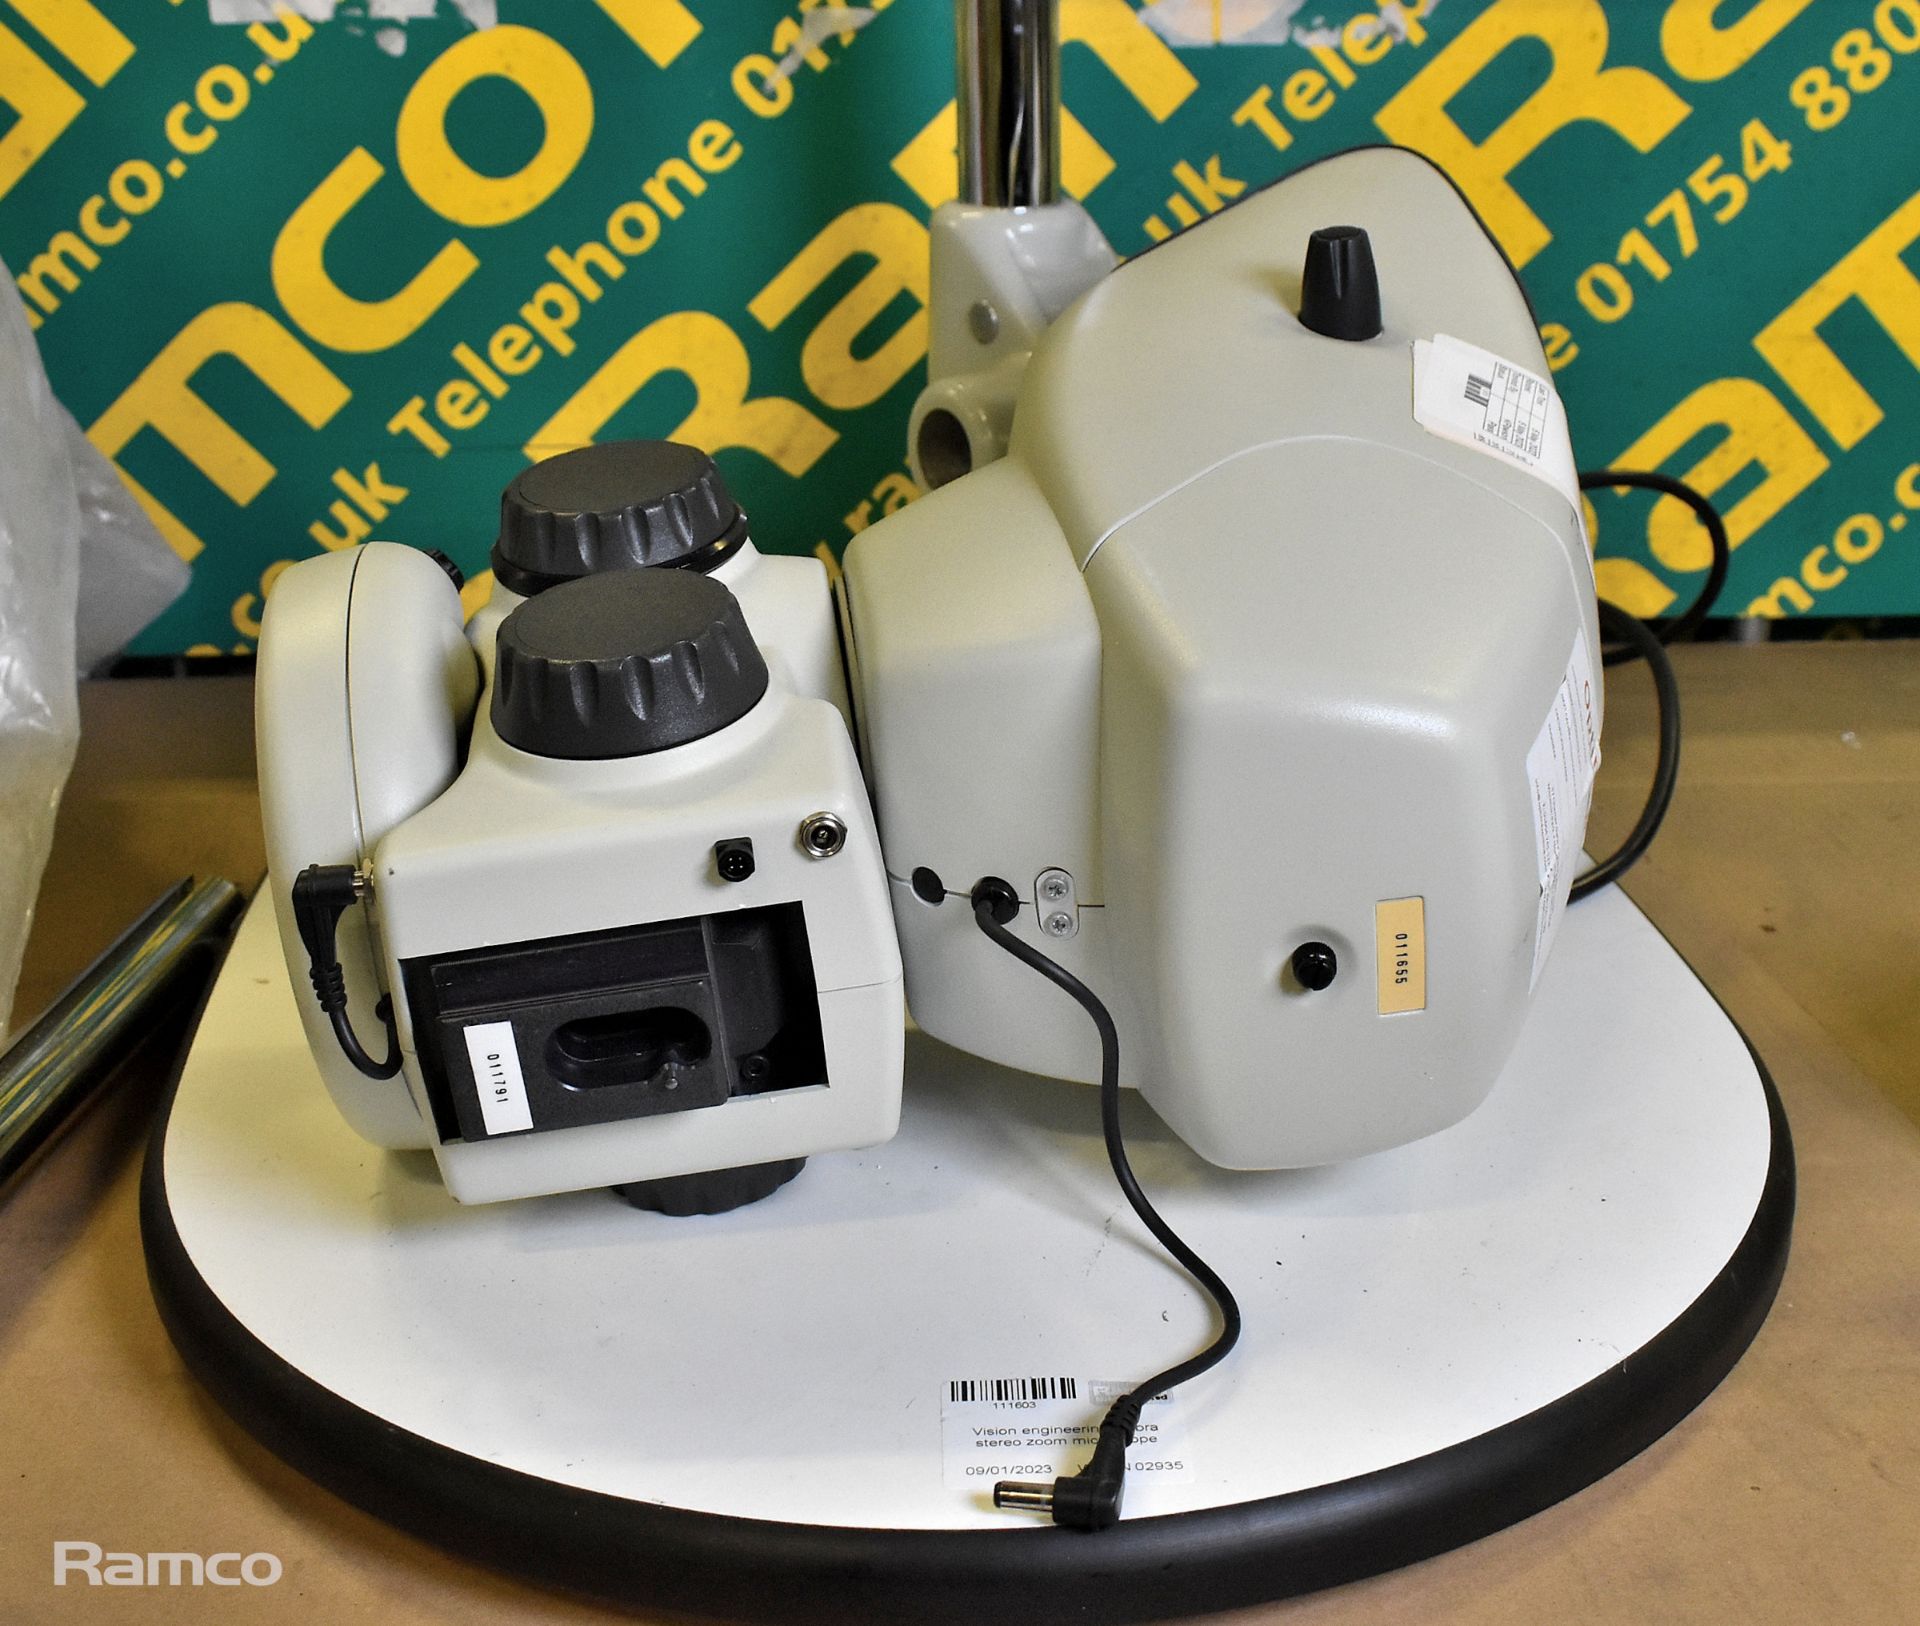 Vision engineering Cobra stereo zoom microscope - Image 4 of 10